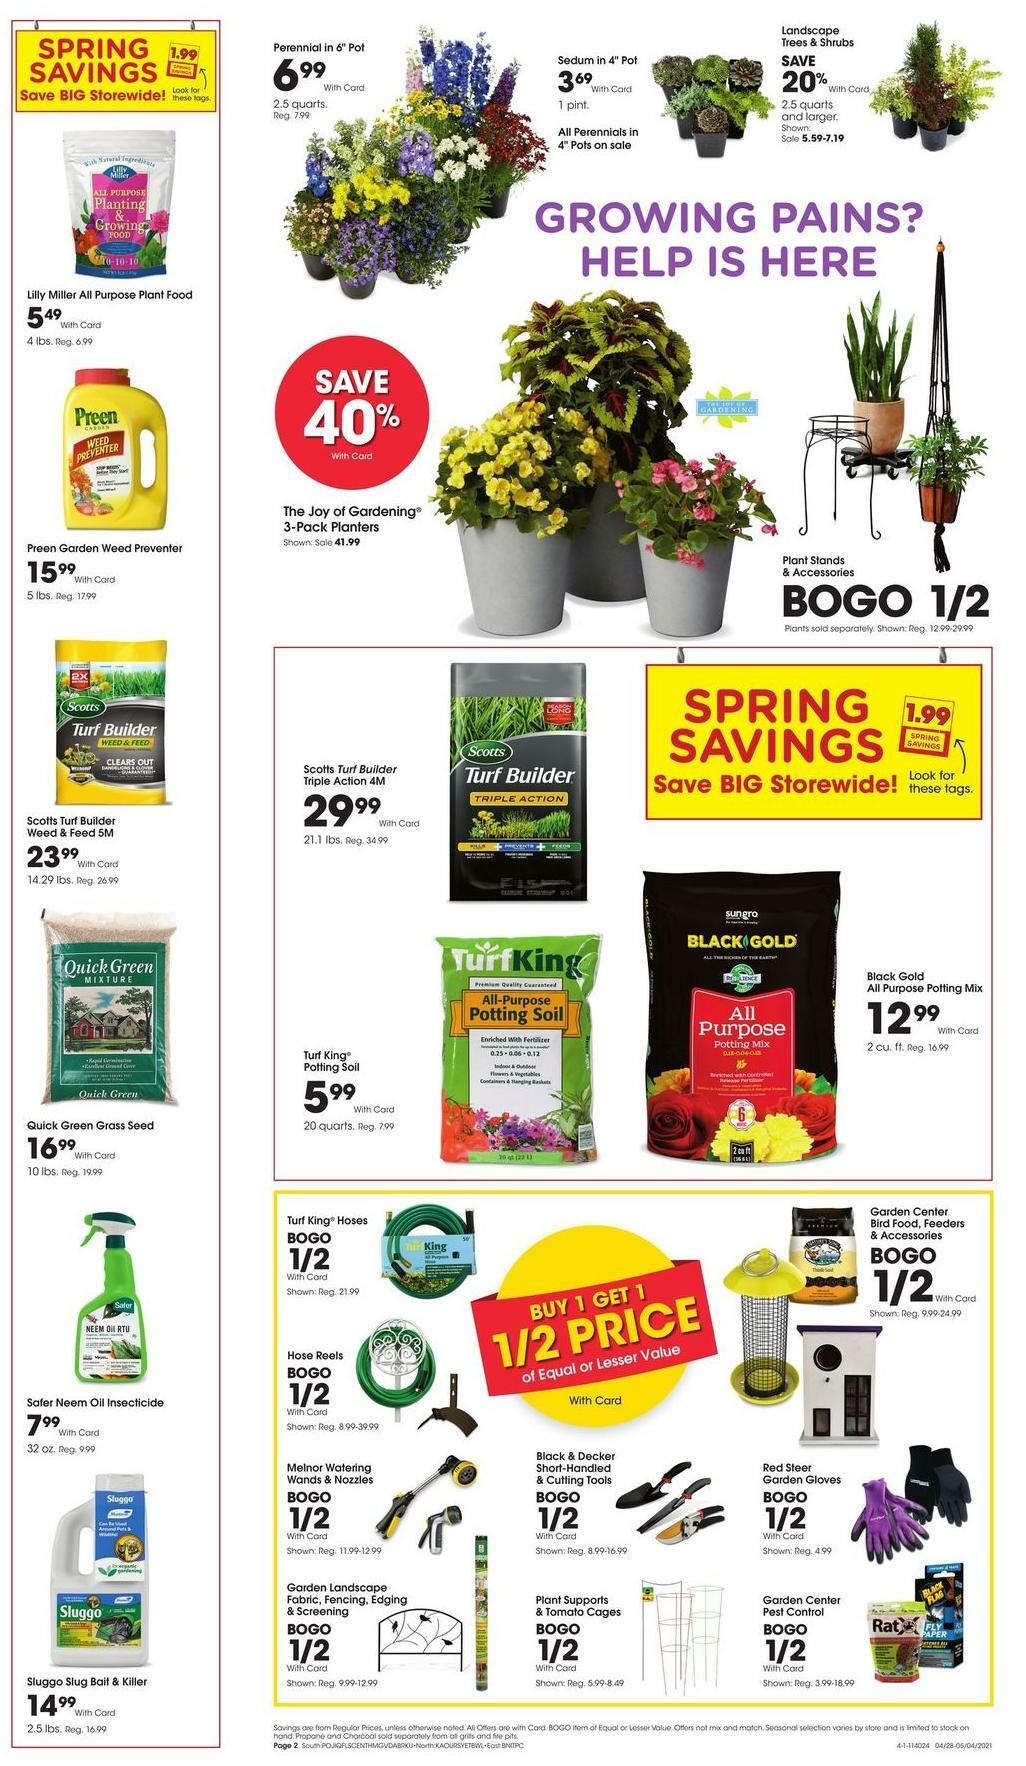 Fred Meyer Garden Weekly Ad & Specials from April 28 Page 2